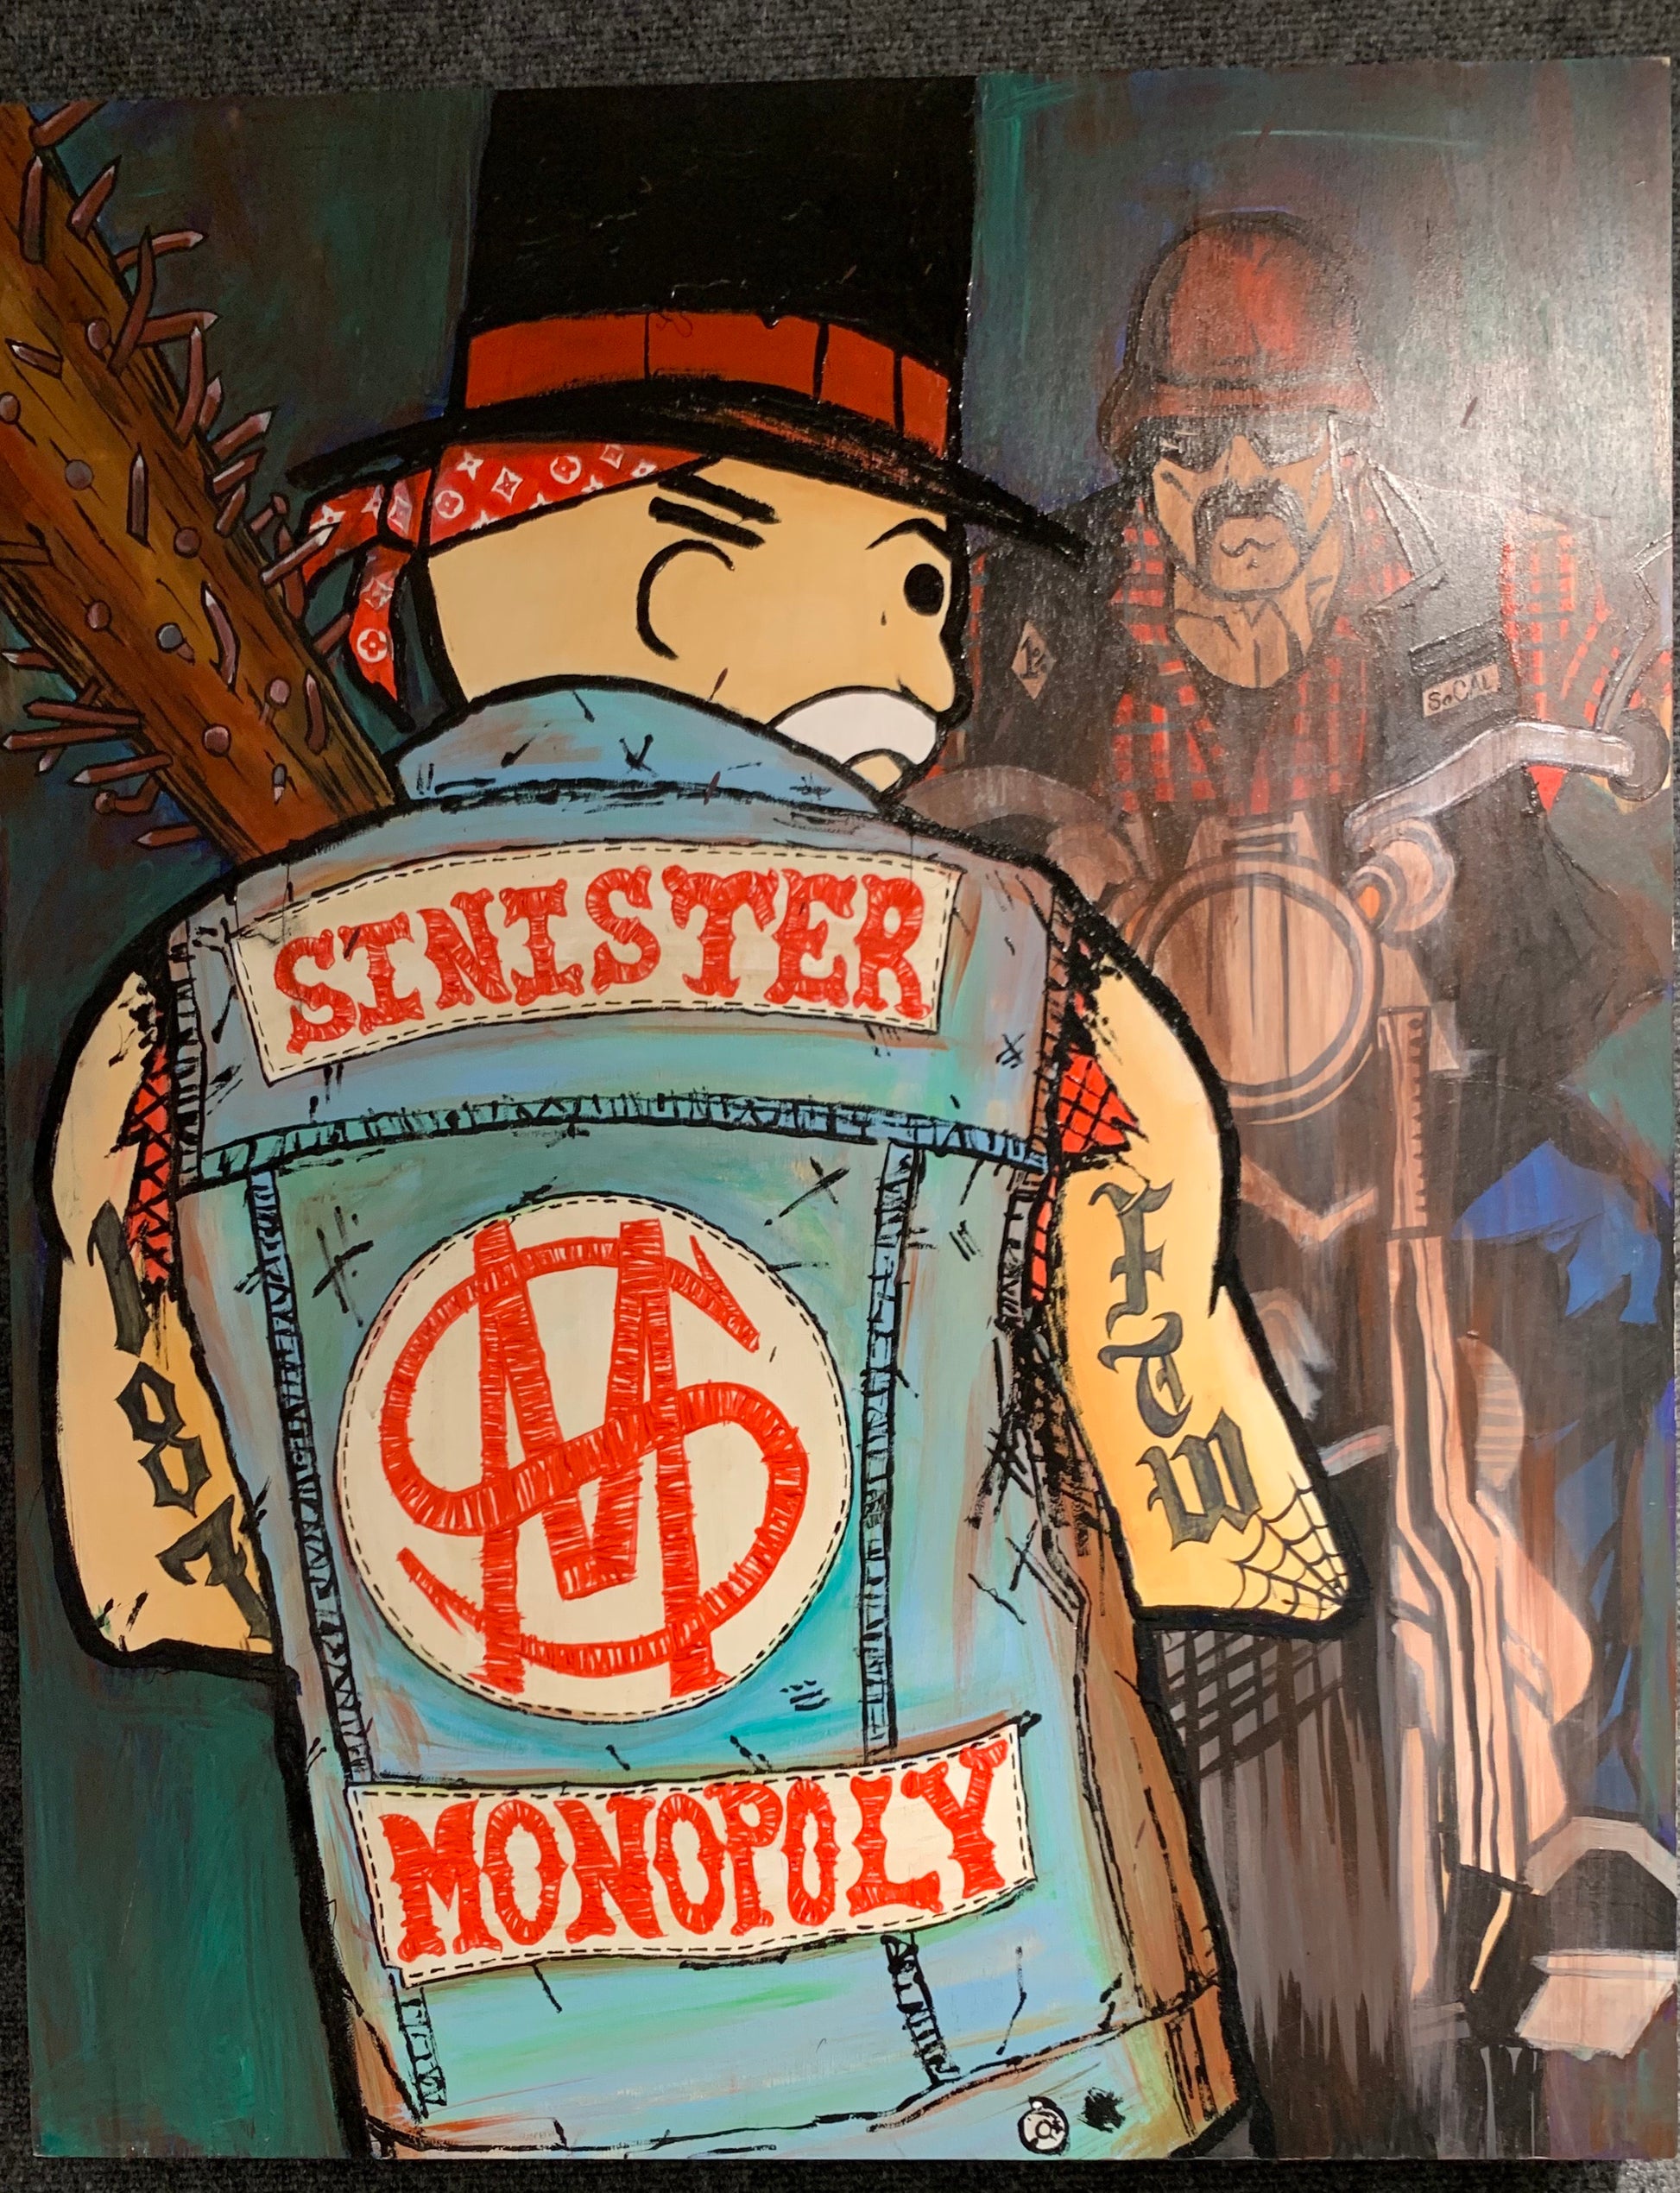 Sinister Monopoly “Sergeant of Arms” 